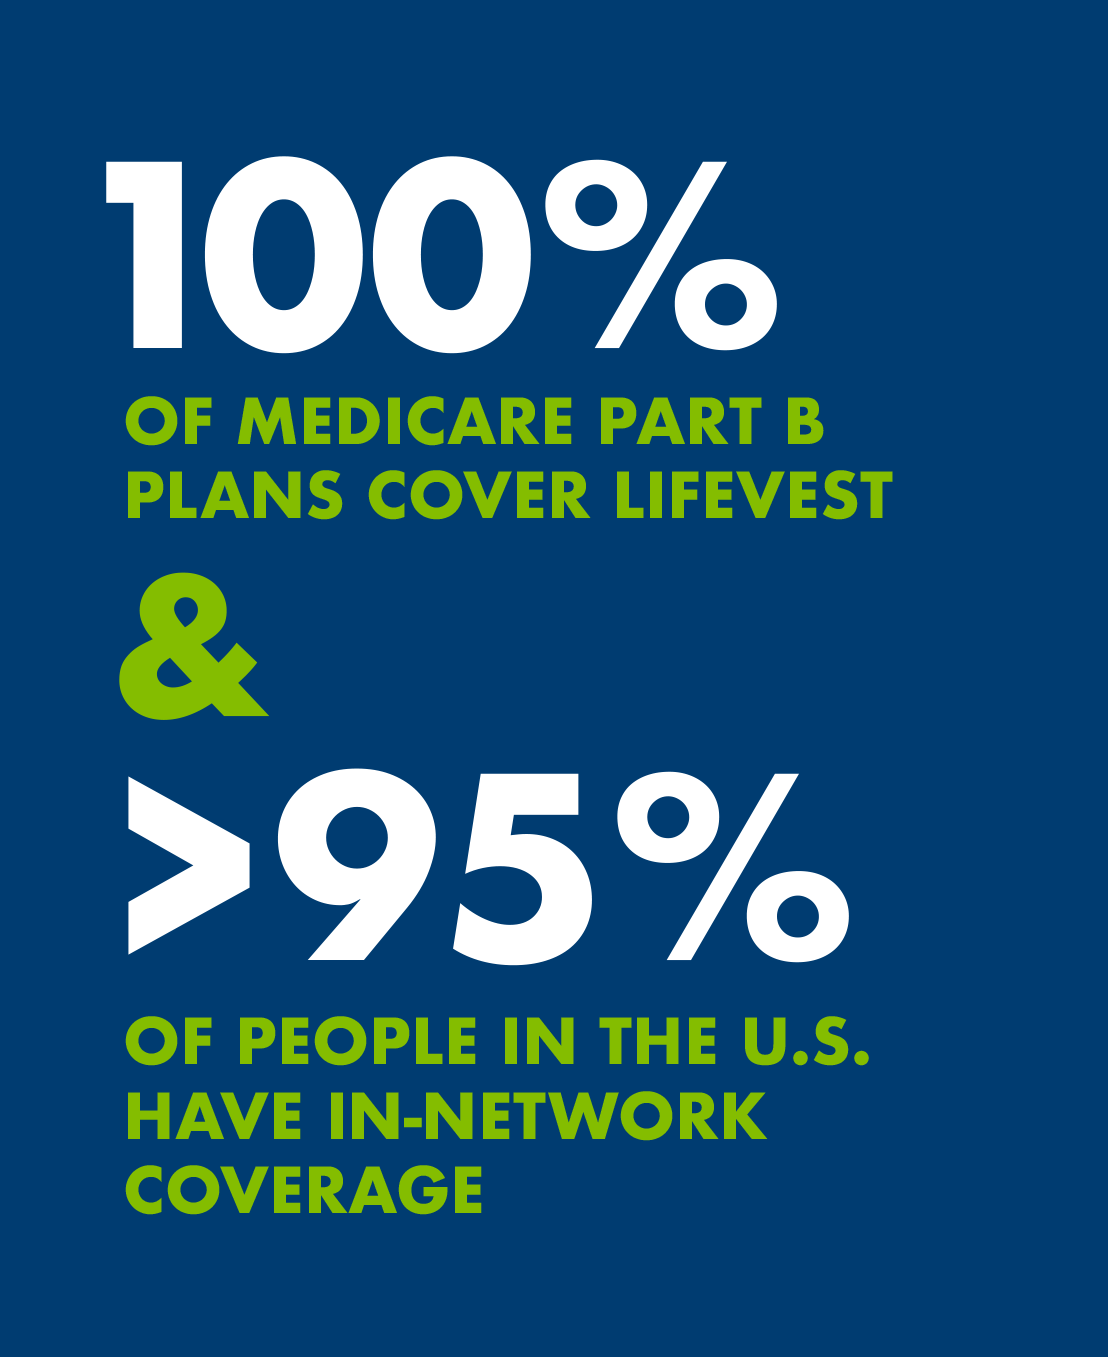 100% of Medicare Part B Plans cover LifeVest and greater than 95% of people in the US have in-network coverage